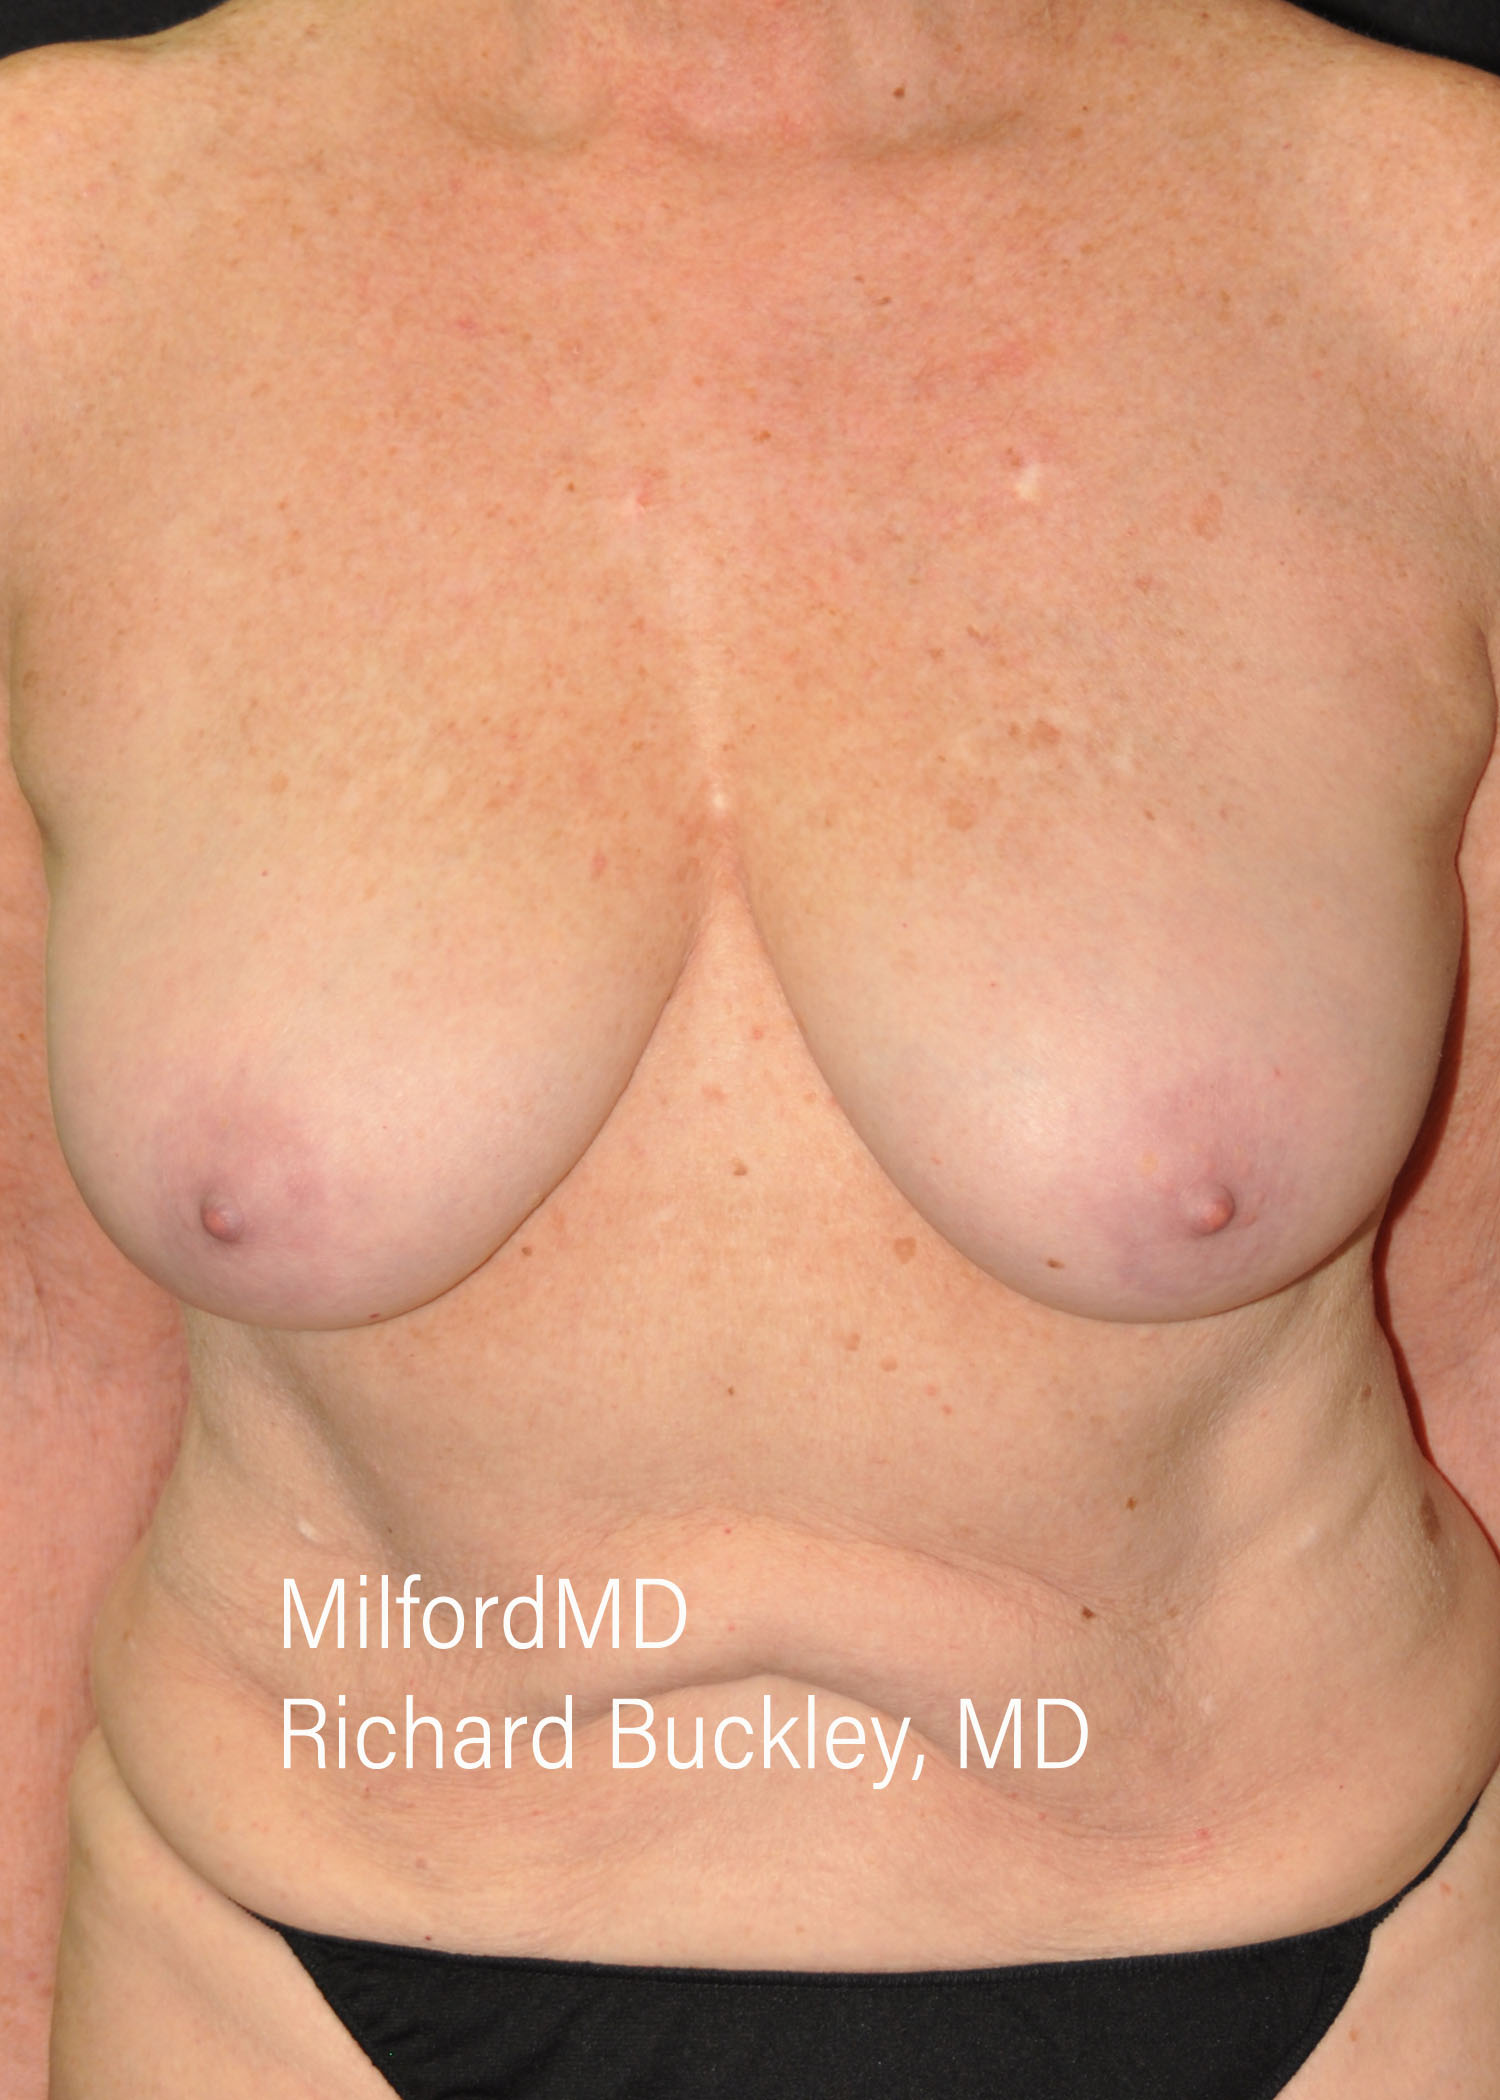 Breast Reduction Before and After,Breast Reduction Before and After Photos,Breast Reduction, Breast Reduction